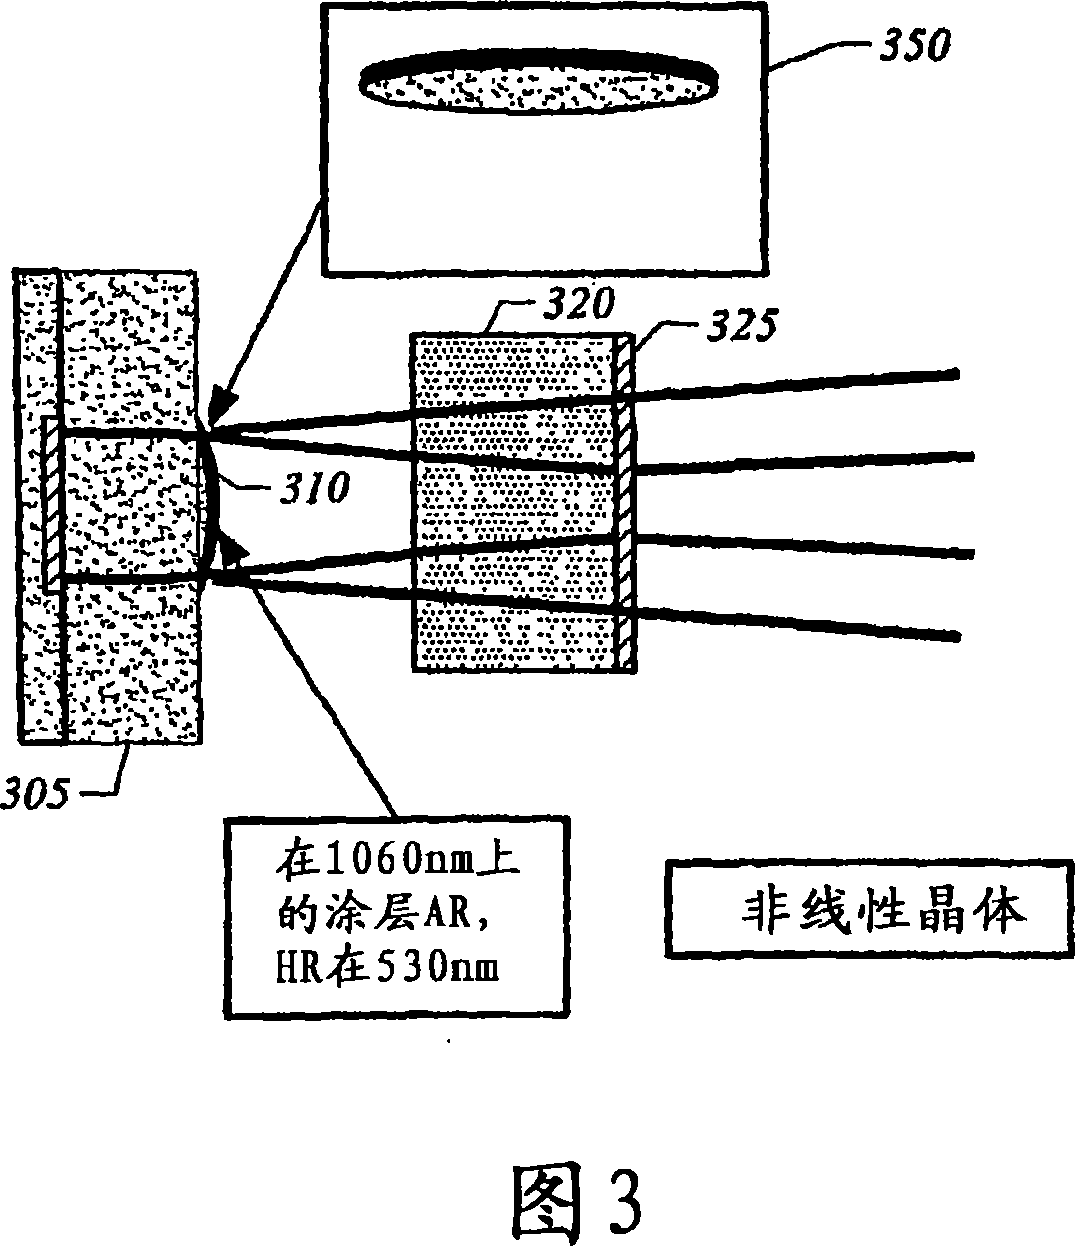 Frequency stabilized vertical extended cavity surface emitting lasers